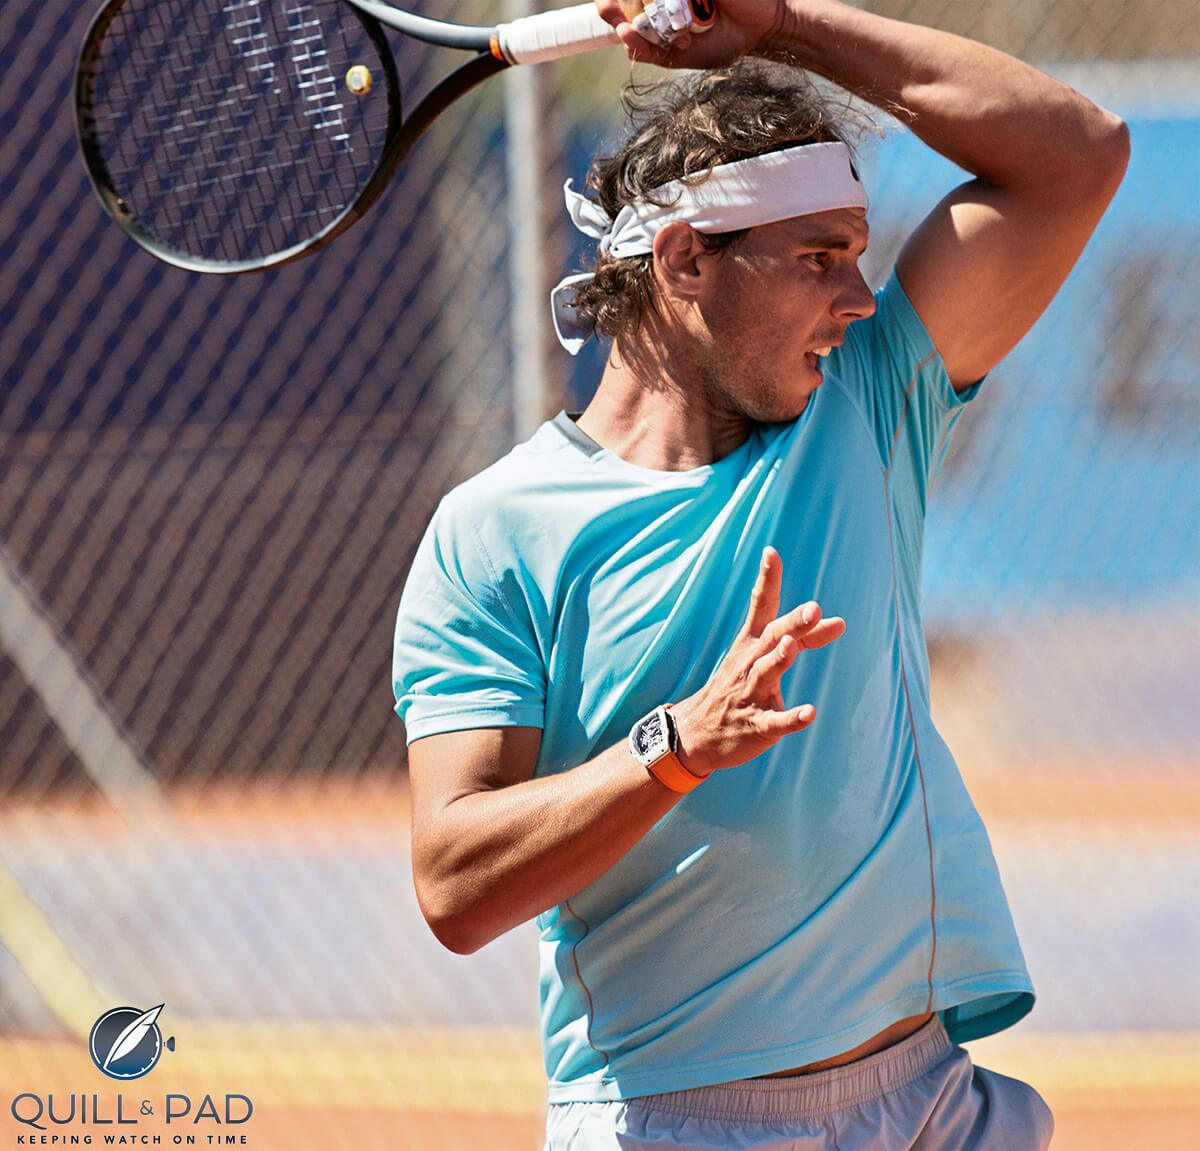 Rafael Nadal's energetic style of tennis is the ultimate test for the Richard Mille RM027-02 RN